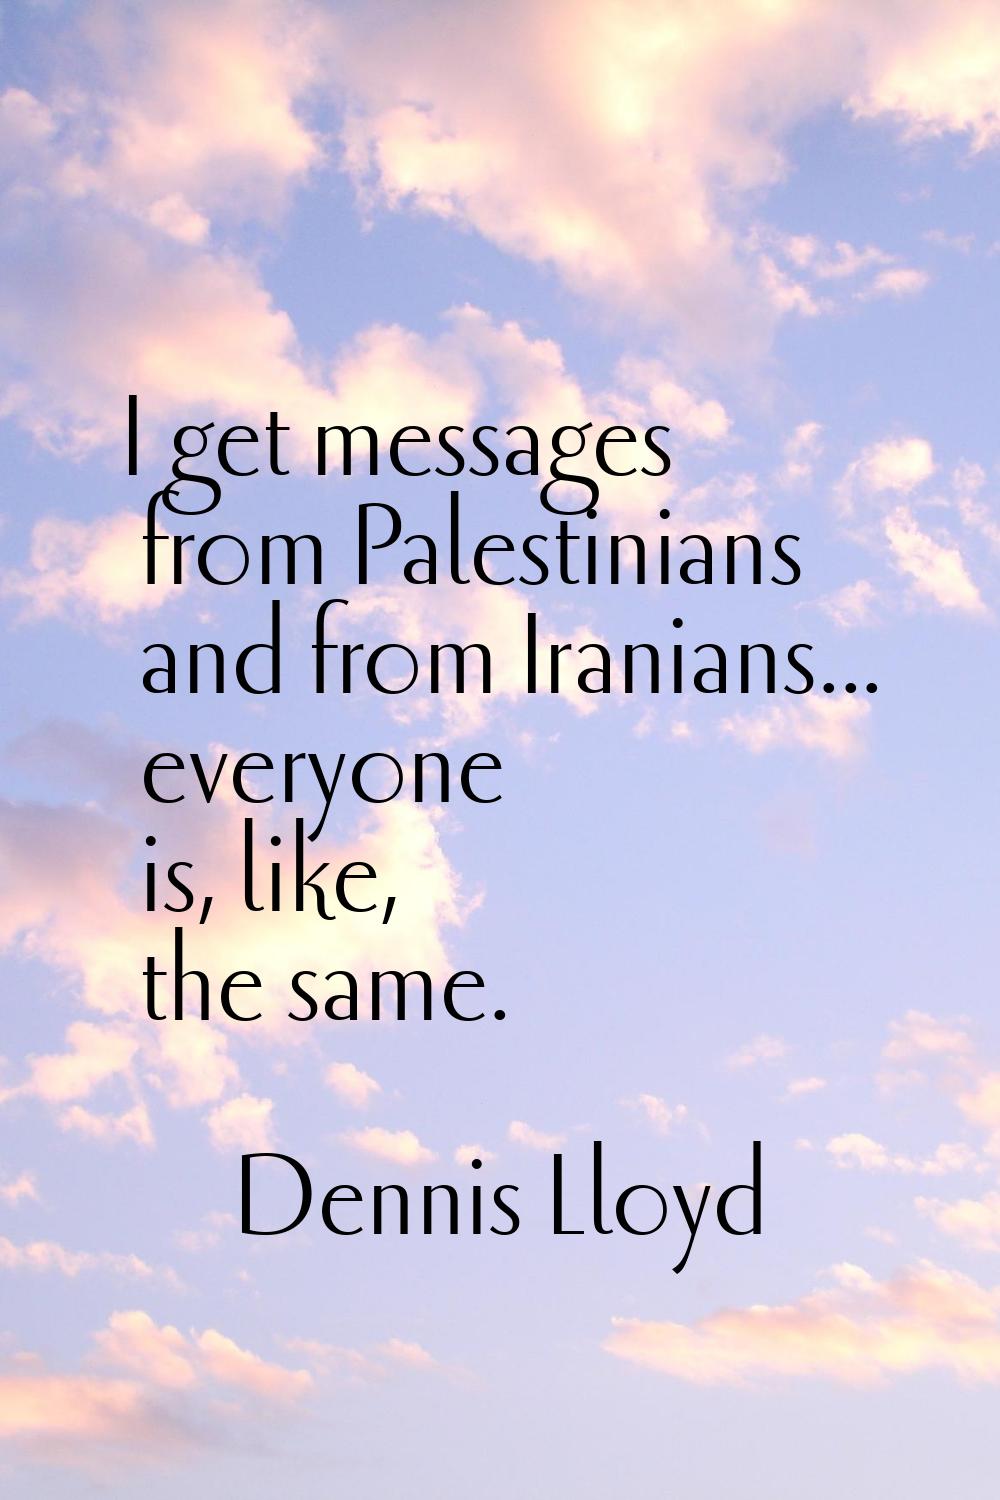 I get messages from Palestinians and from Iranians... everyone is, like, the same.